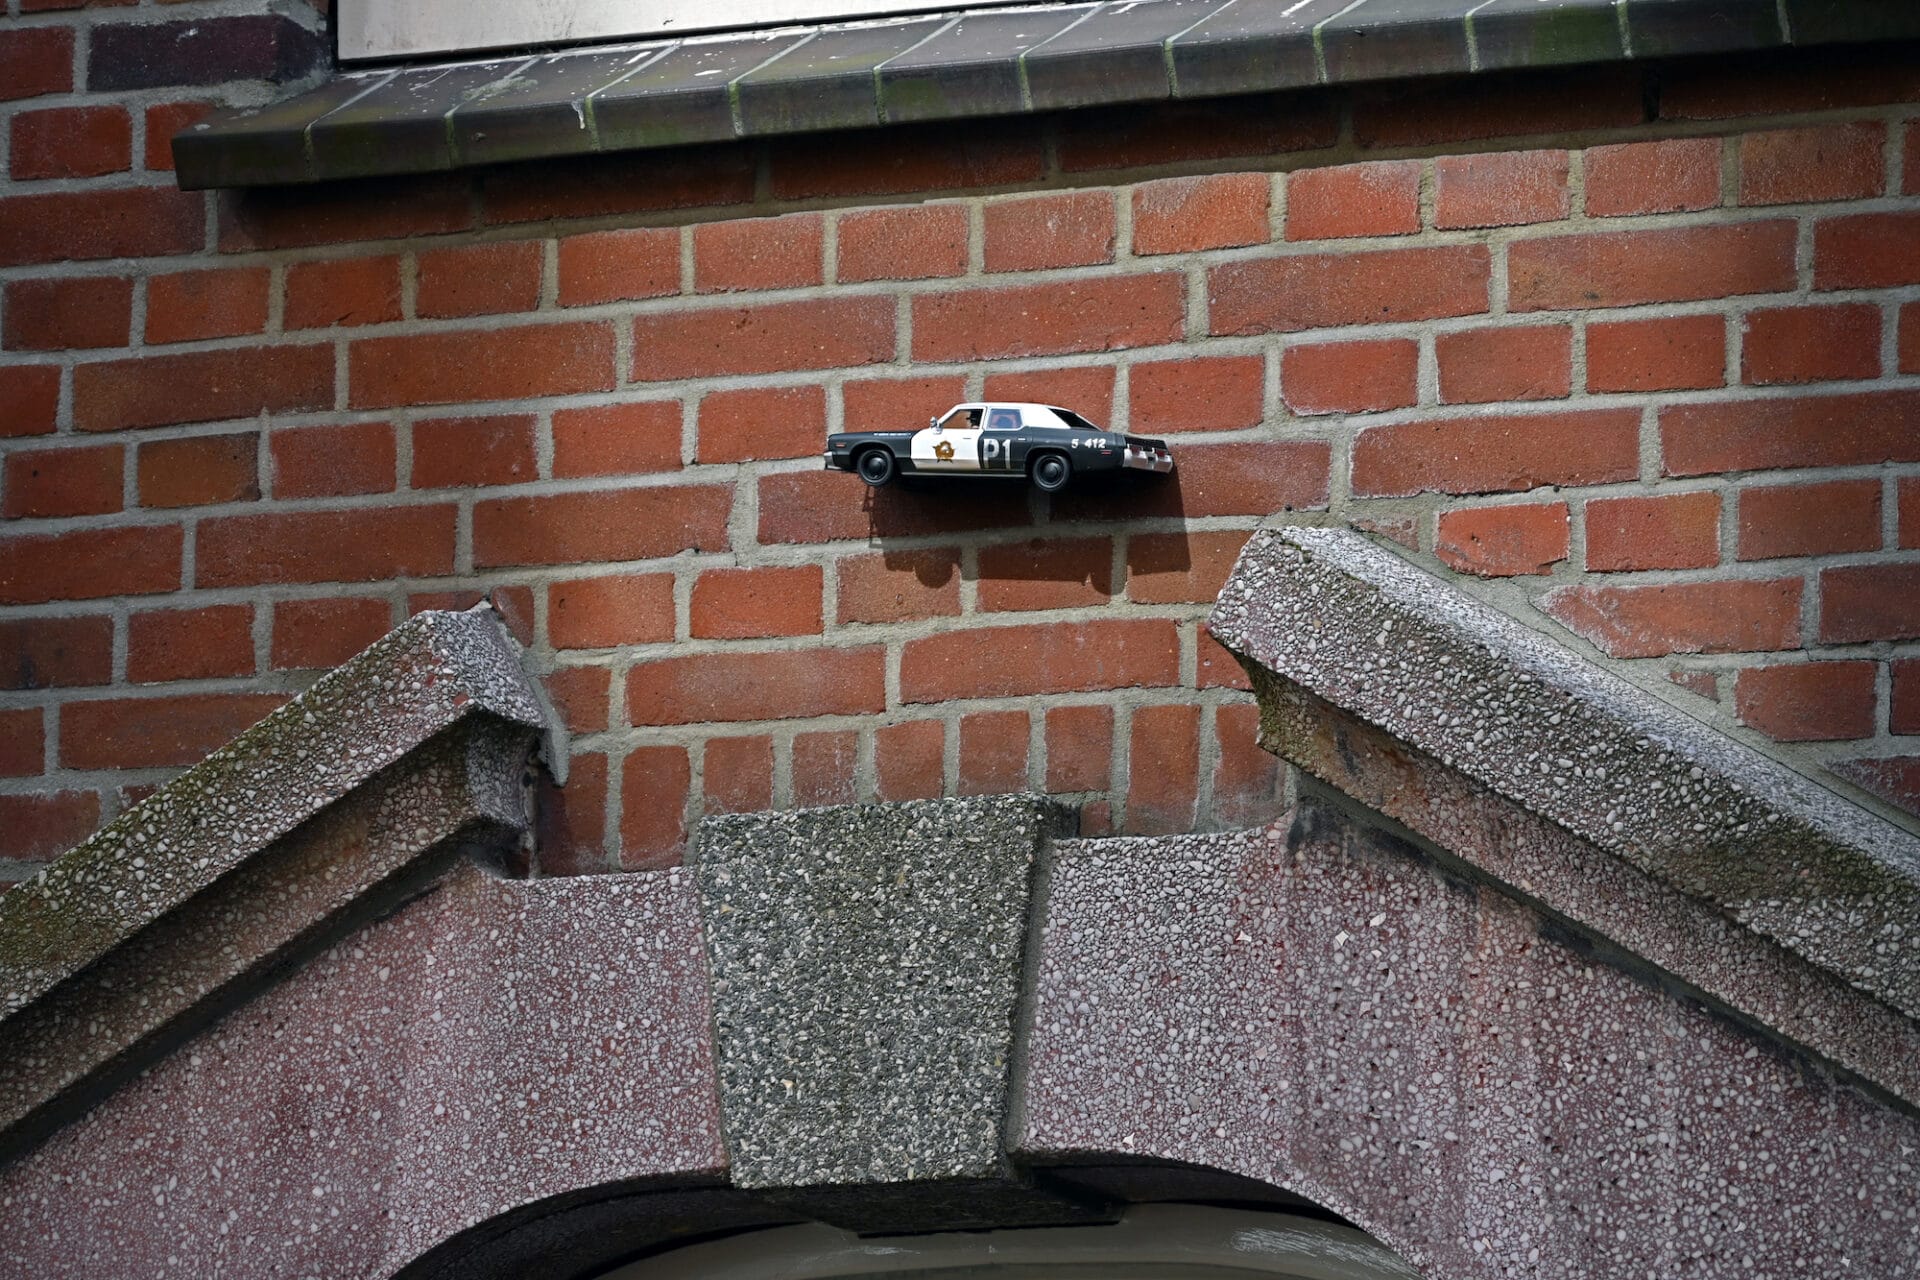 A little sculpture of a police car is stuck to a brick wall and appears to leap over a door.